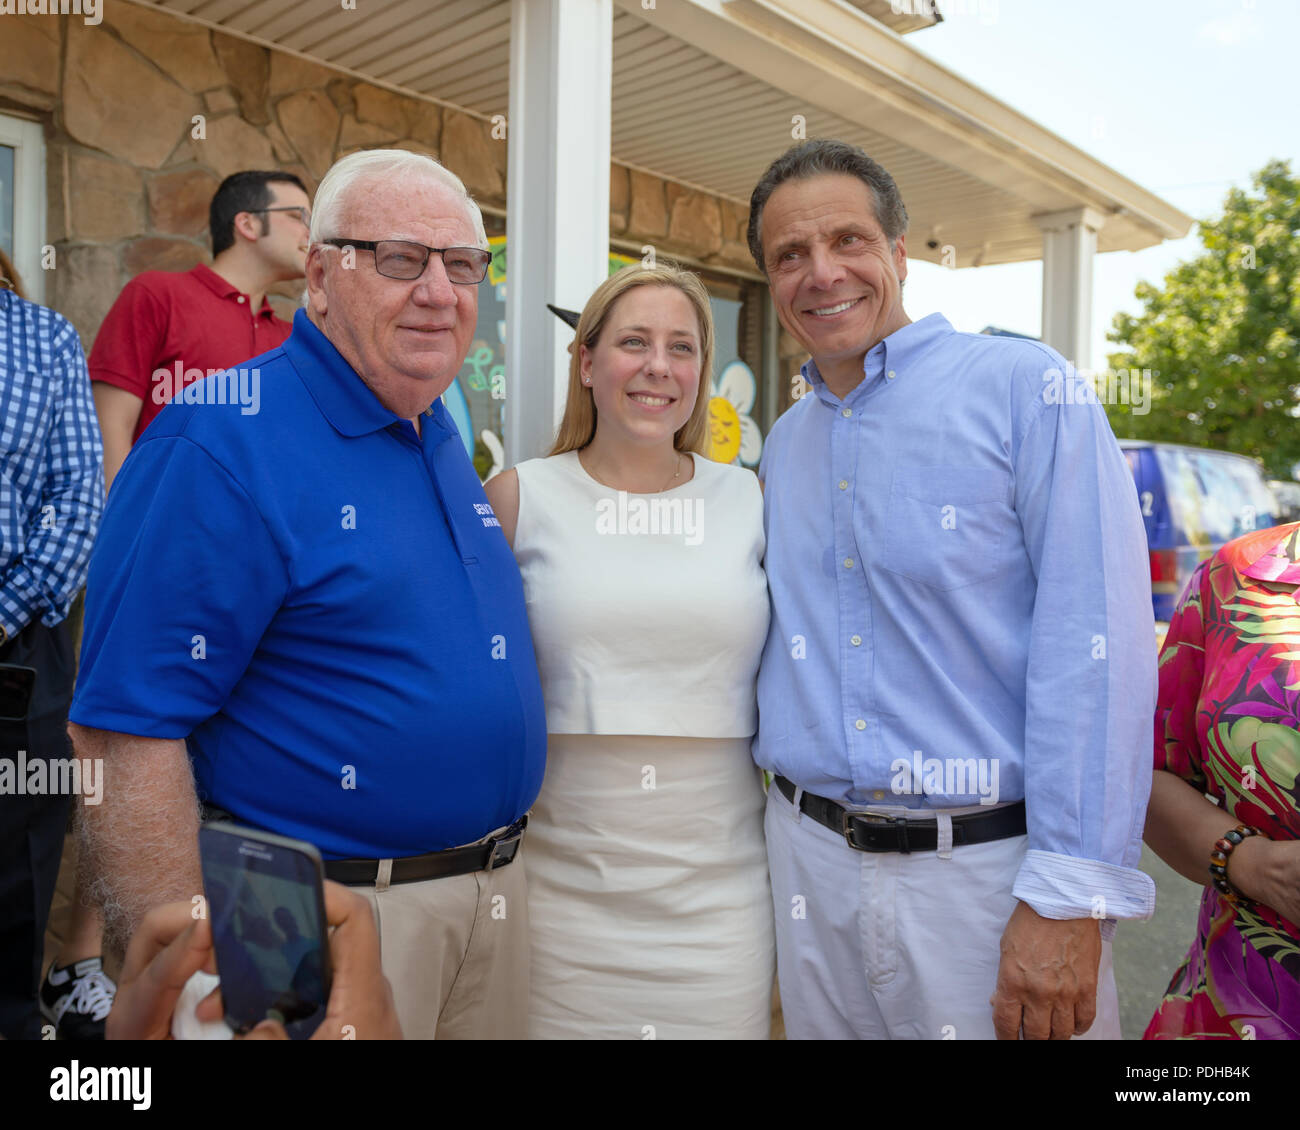 Massapequa, New York, USA. 5th Aug, 2018. L-R, NY Senator JOHN BROOKS; LIUBA GRECHEN SHIRLEY, Congressional candidate for NY 2nd District; and Governor ANDREW CUOMO, running for re-election, pose among supporters during opening of joint campaign office for the 2 Long Islanders, aiming for a Democratic Blue Wave in November midterm elections. Credit: Ann Parry/ZUMA Wire/Alamy Live News Stock Photo